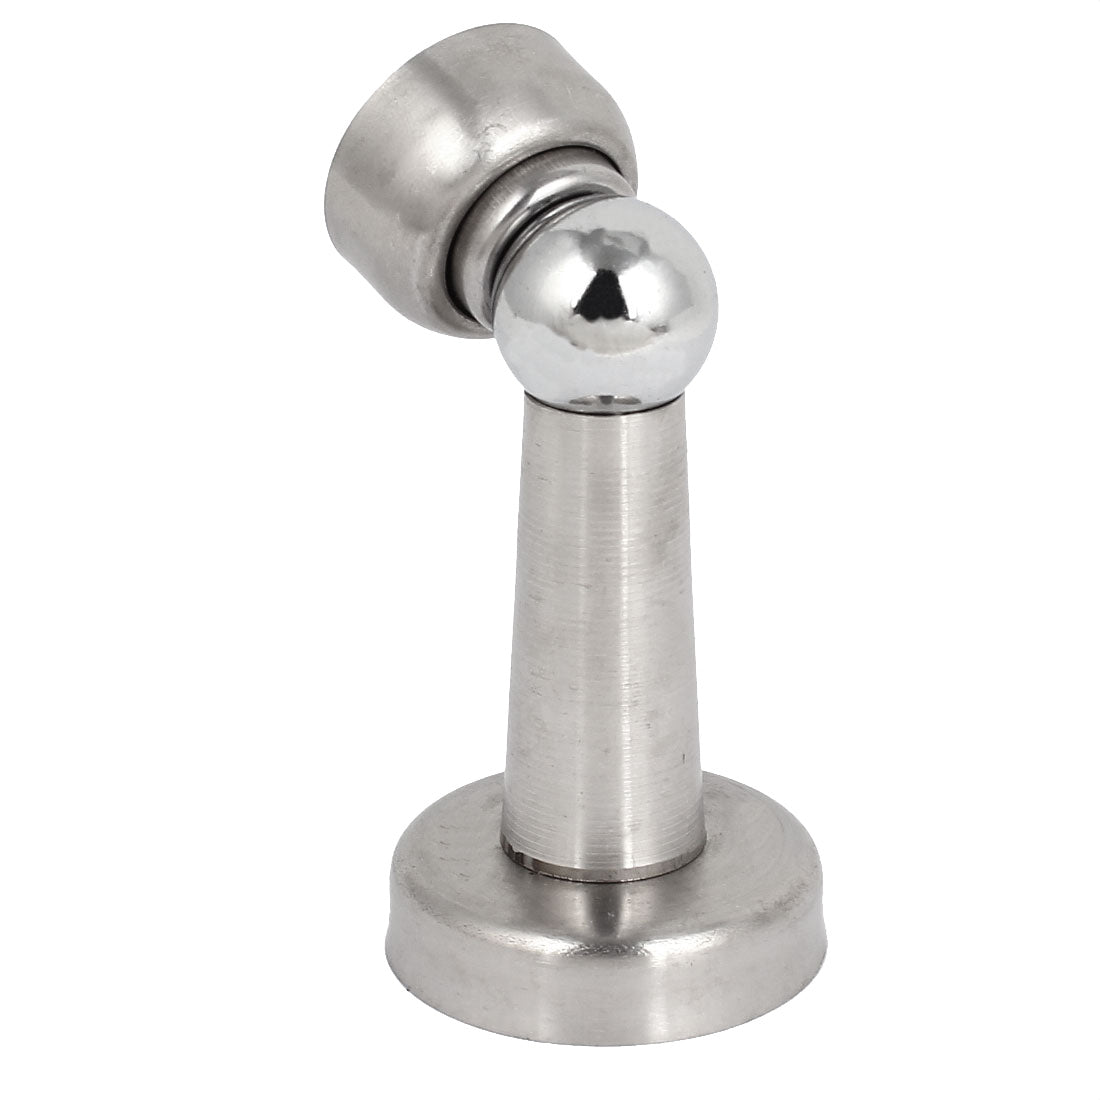 uxcell Uxcell Home Silver Tone Security Magnetic Door Stop Stopper Catch Holder 8cm Long